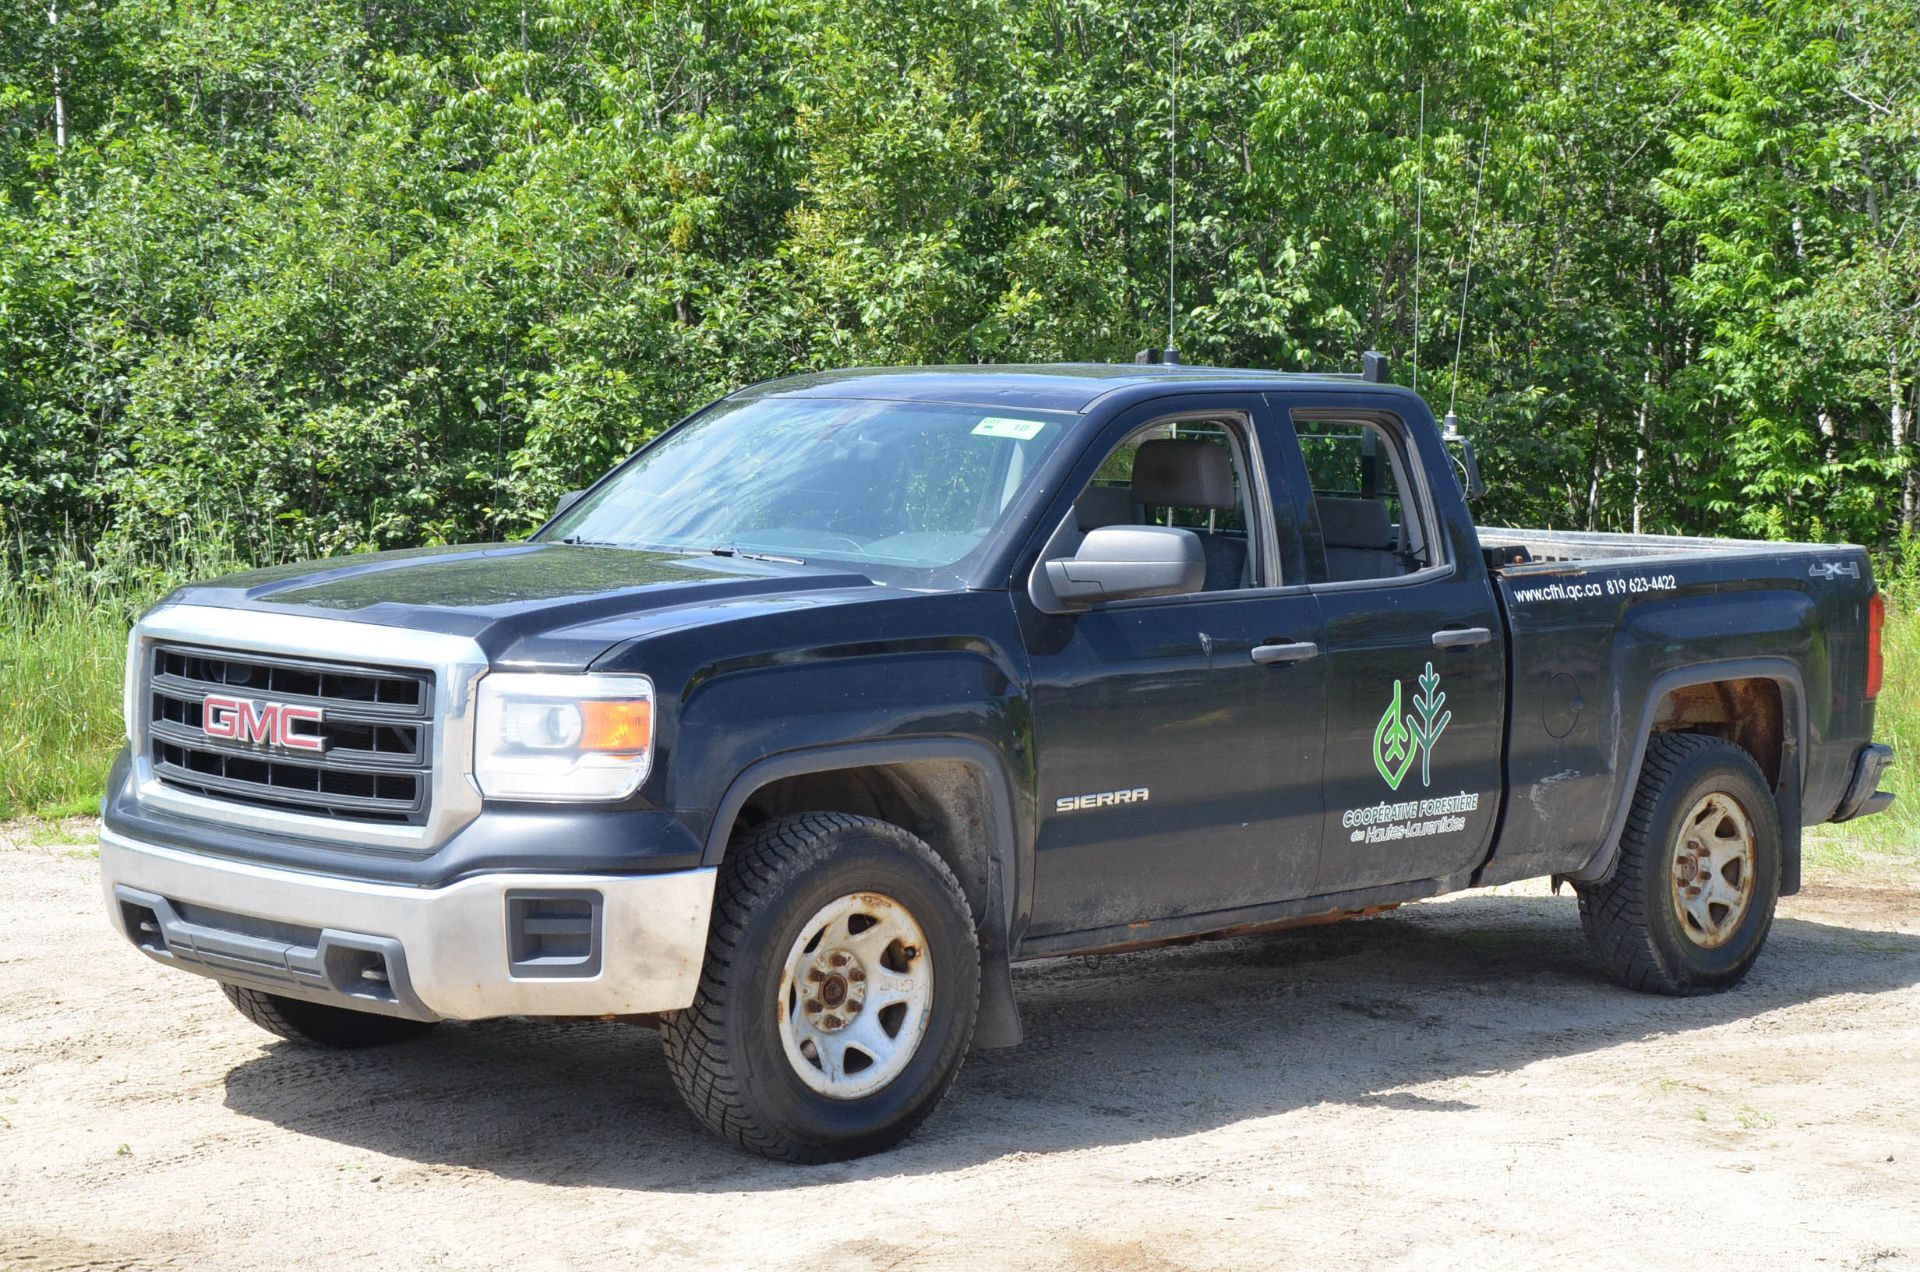 GMC (2015) SIERRA 1500 SLE EXTENDED CAB FOUR DOOR PICKUP TRUCK WITH 5.3LITER V8 GAS ENGINE, AUTO